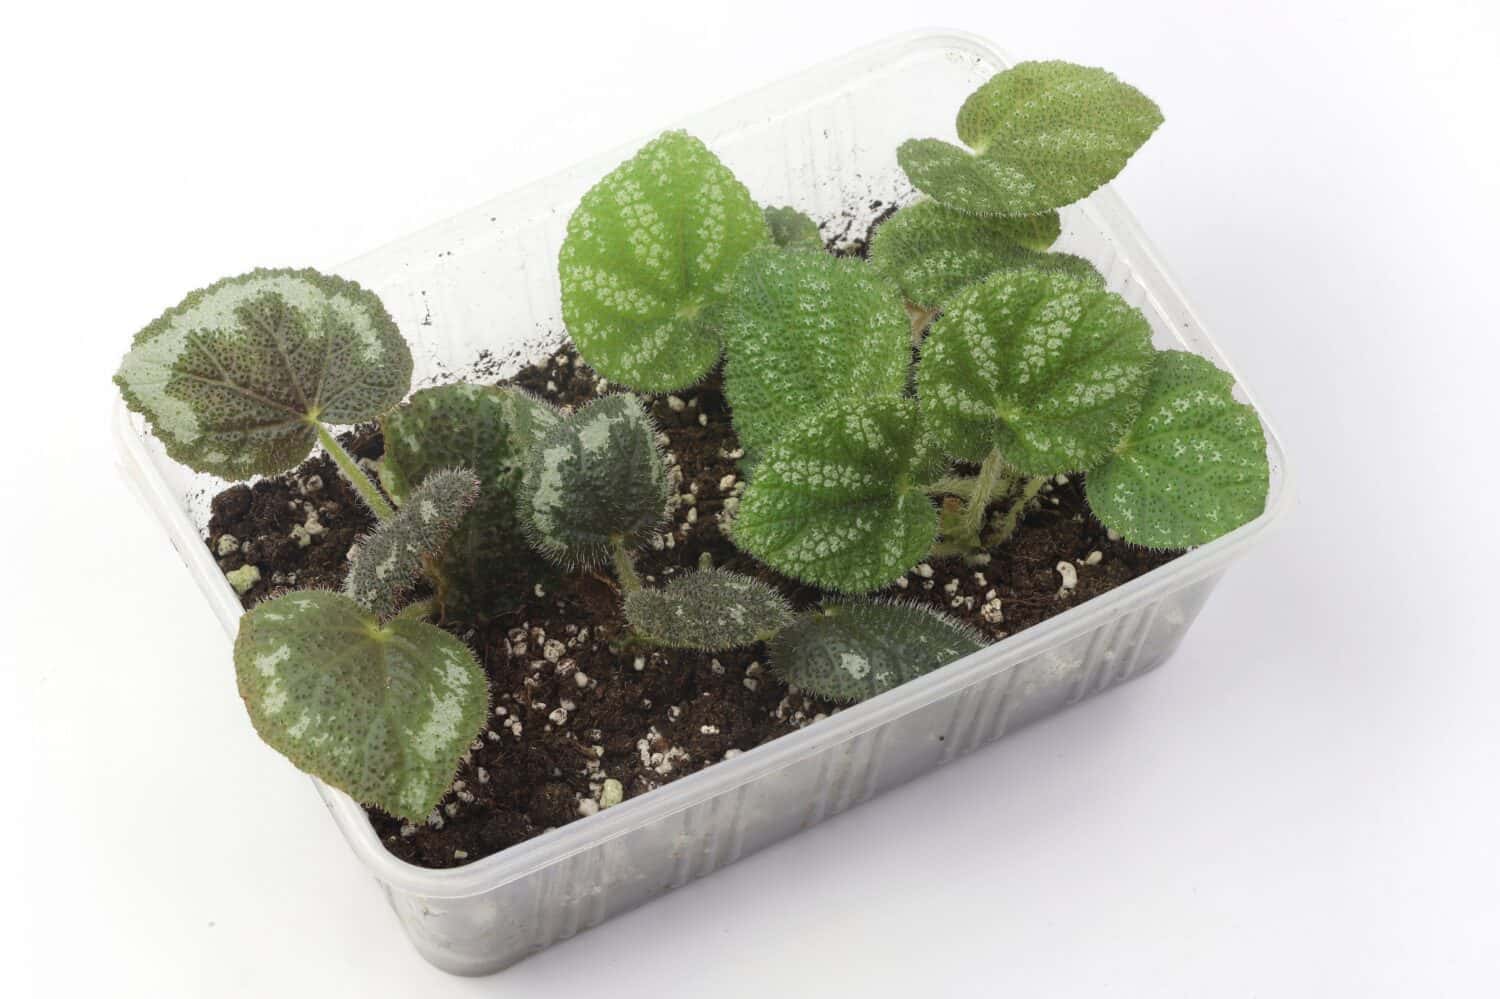 Begonia propagation, isolated on white background . New plant of begonia grow in reused food container